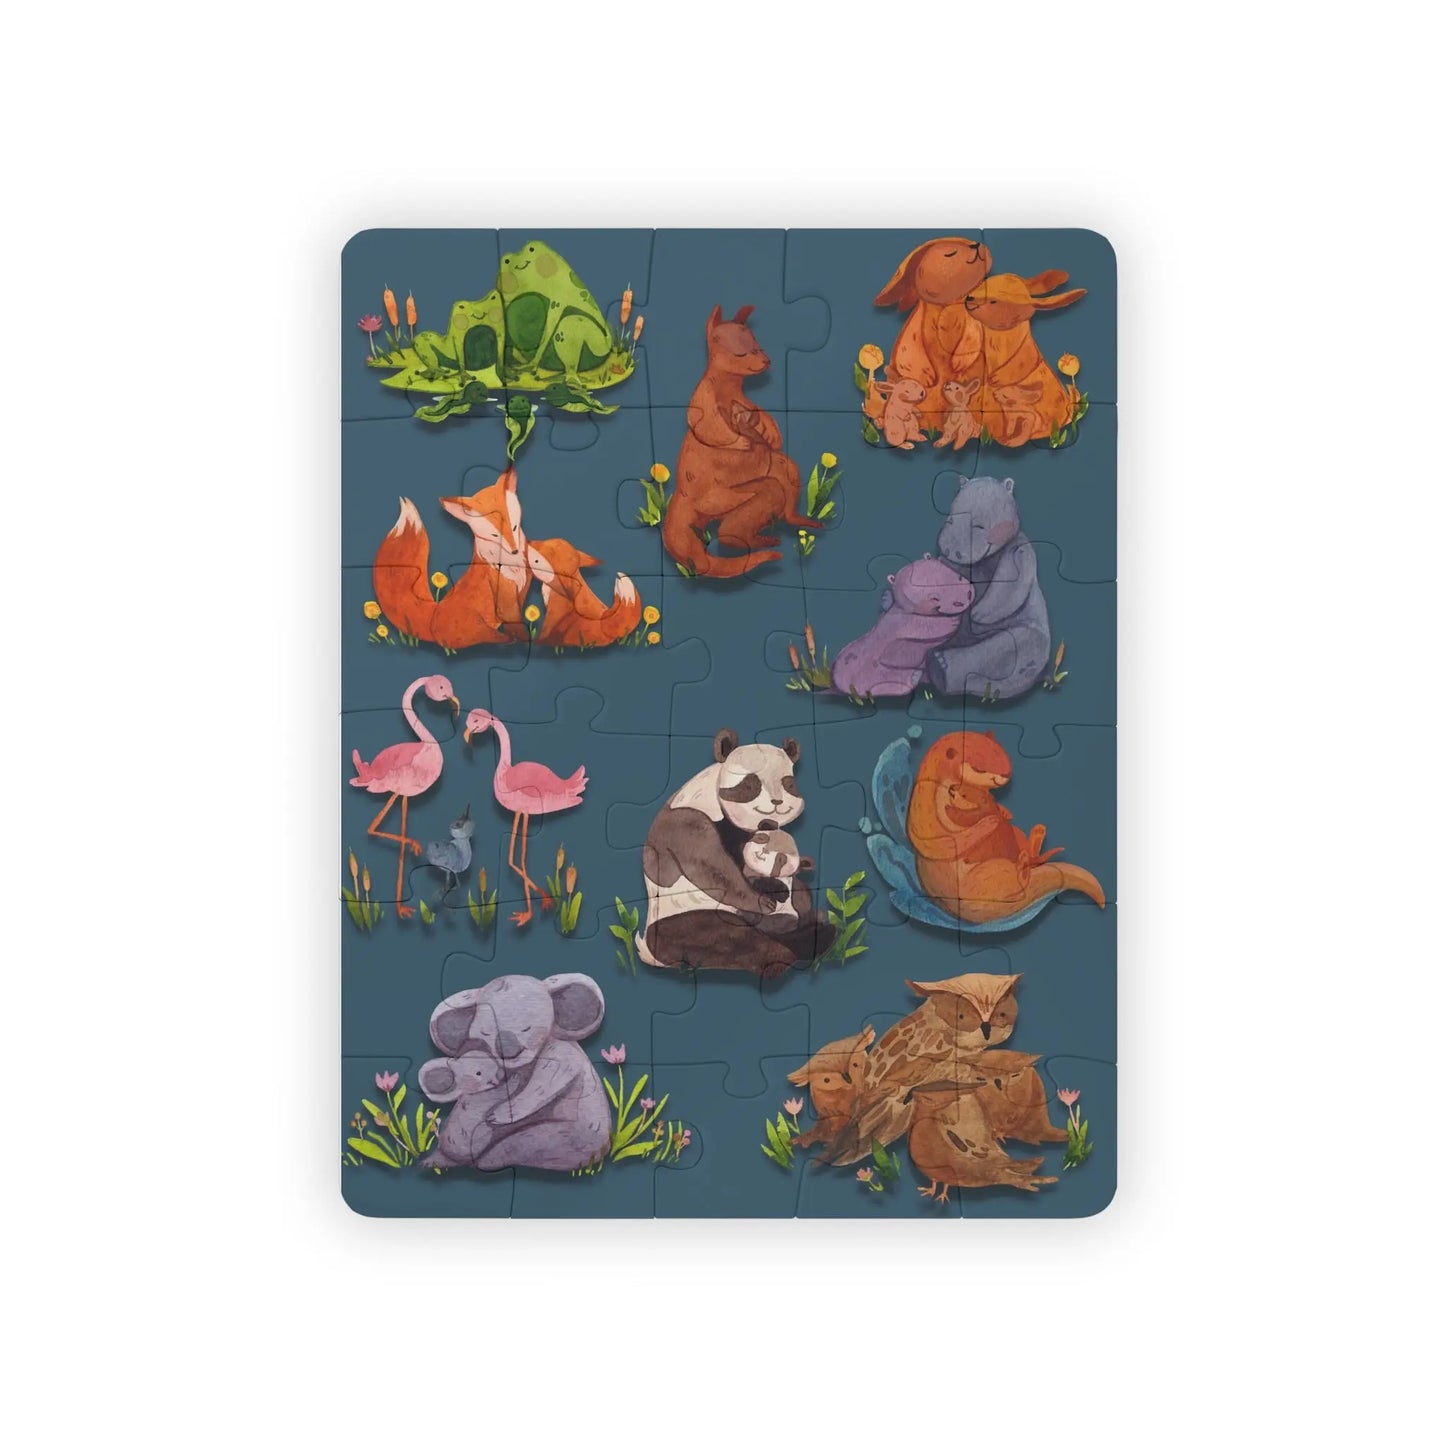 Discover the Joy of Cute Baby Animals - Jigsaw Puzzle for Kids , 30-Piece - papercraneco